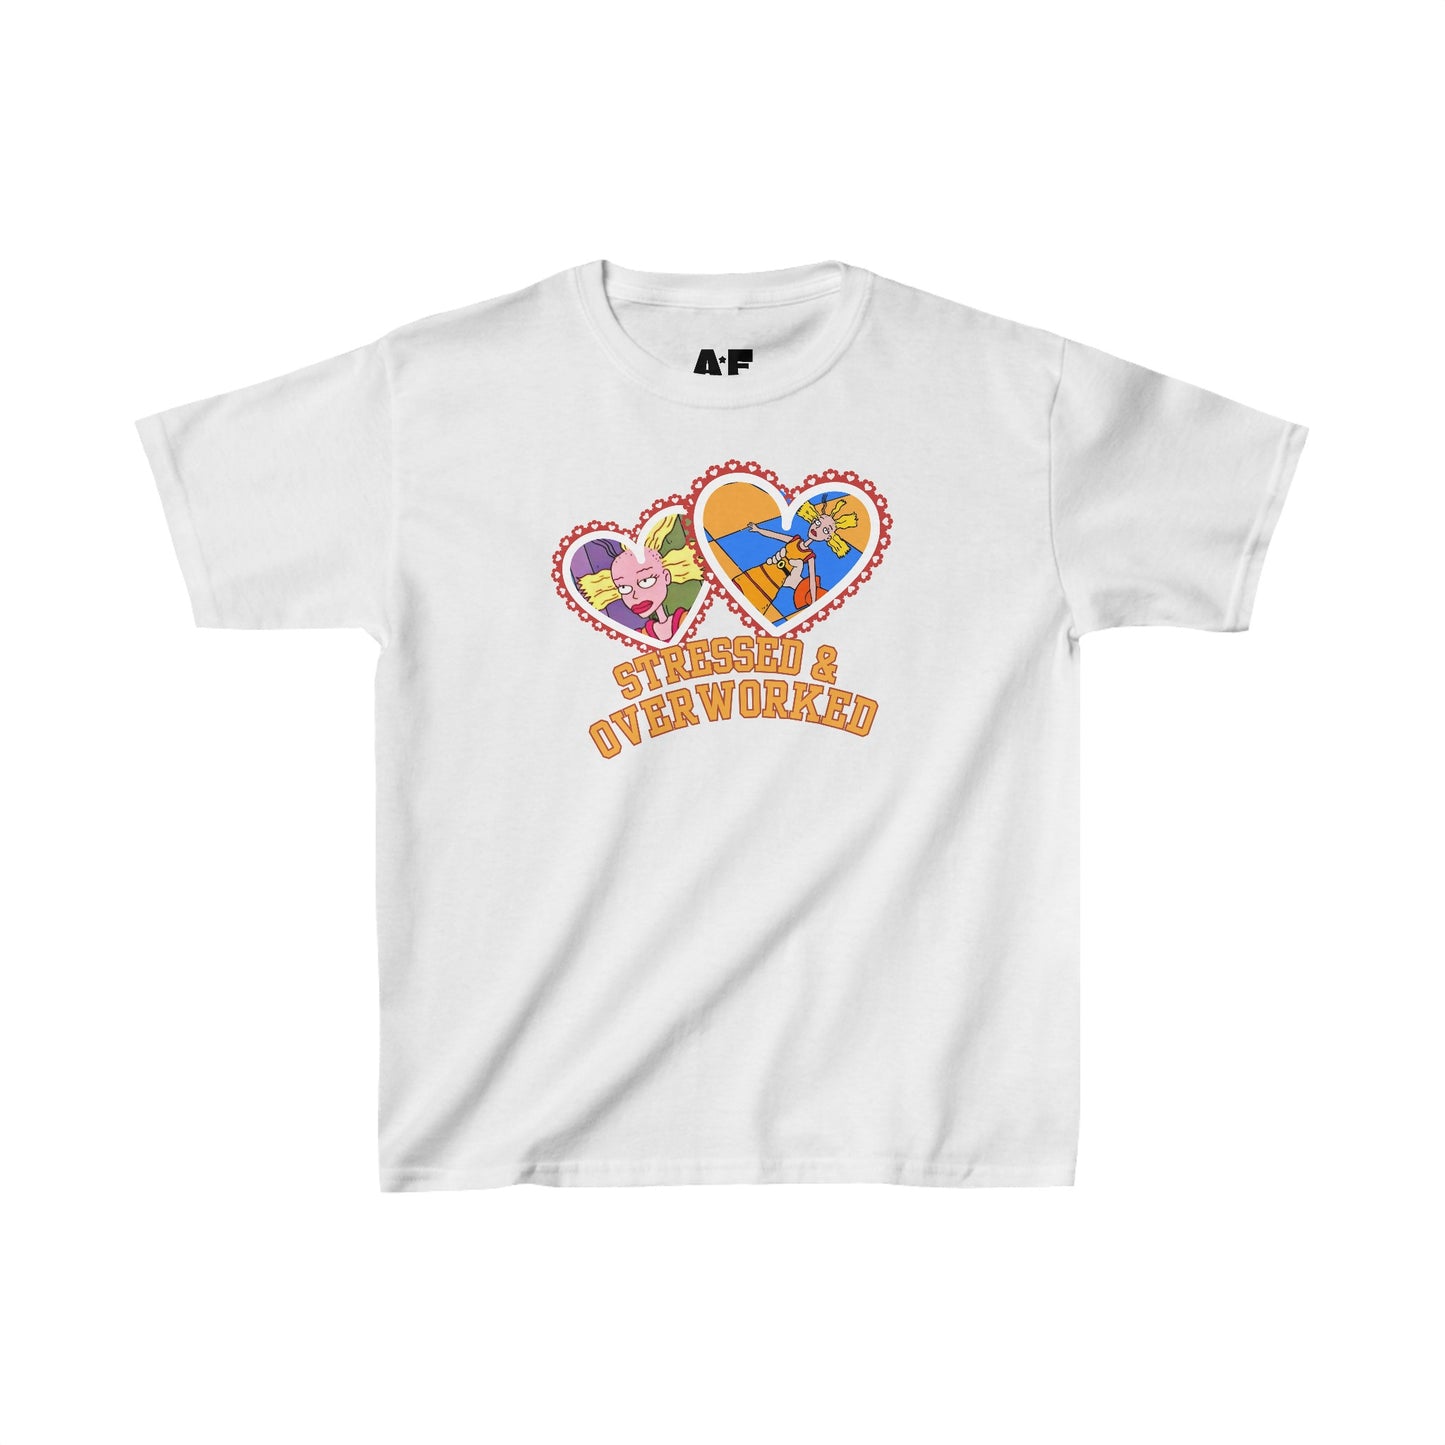 Stressed & Overworked - Baby Tee